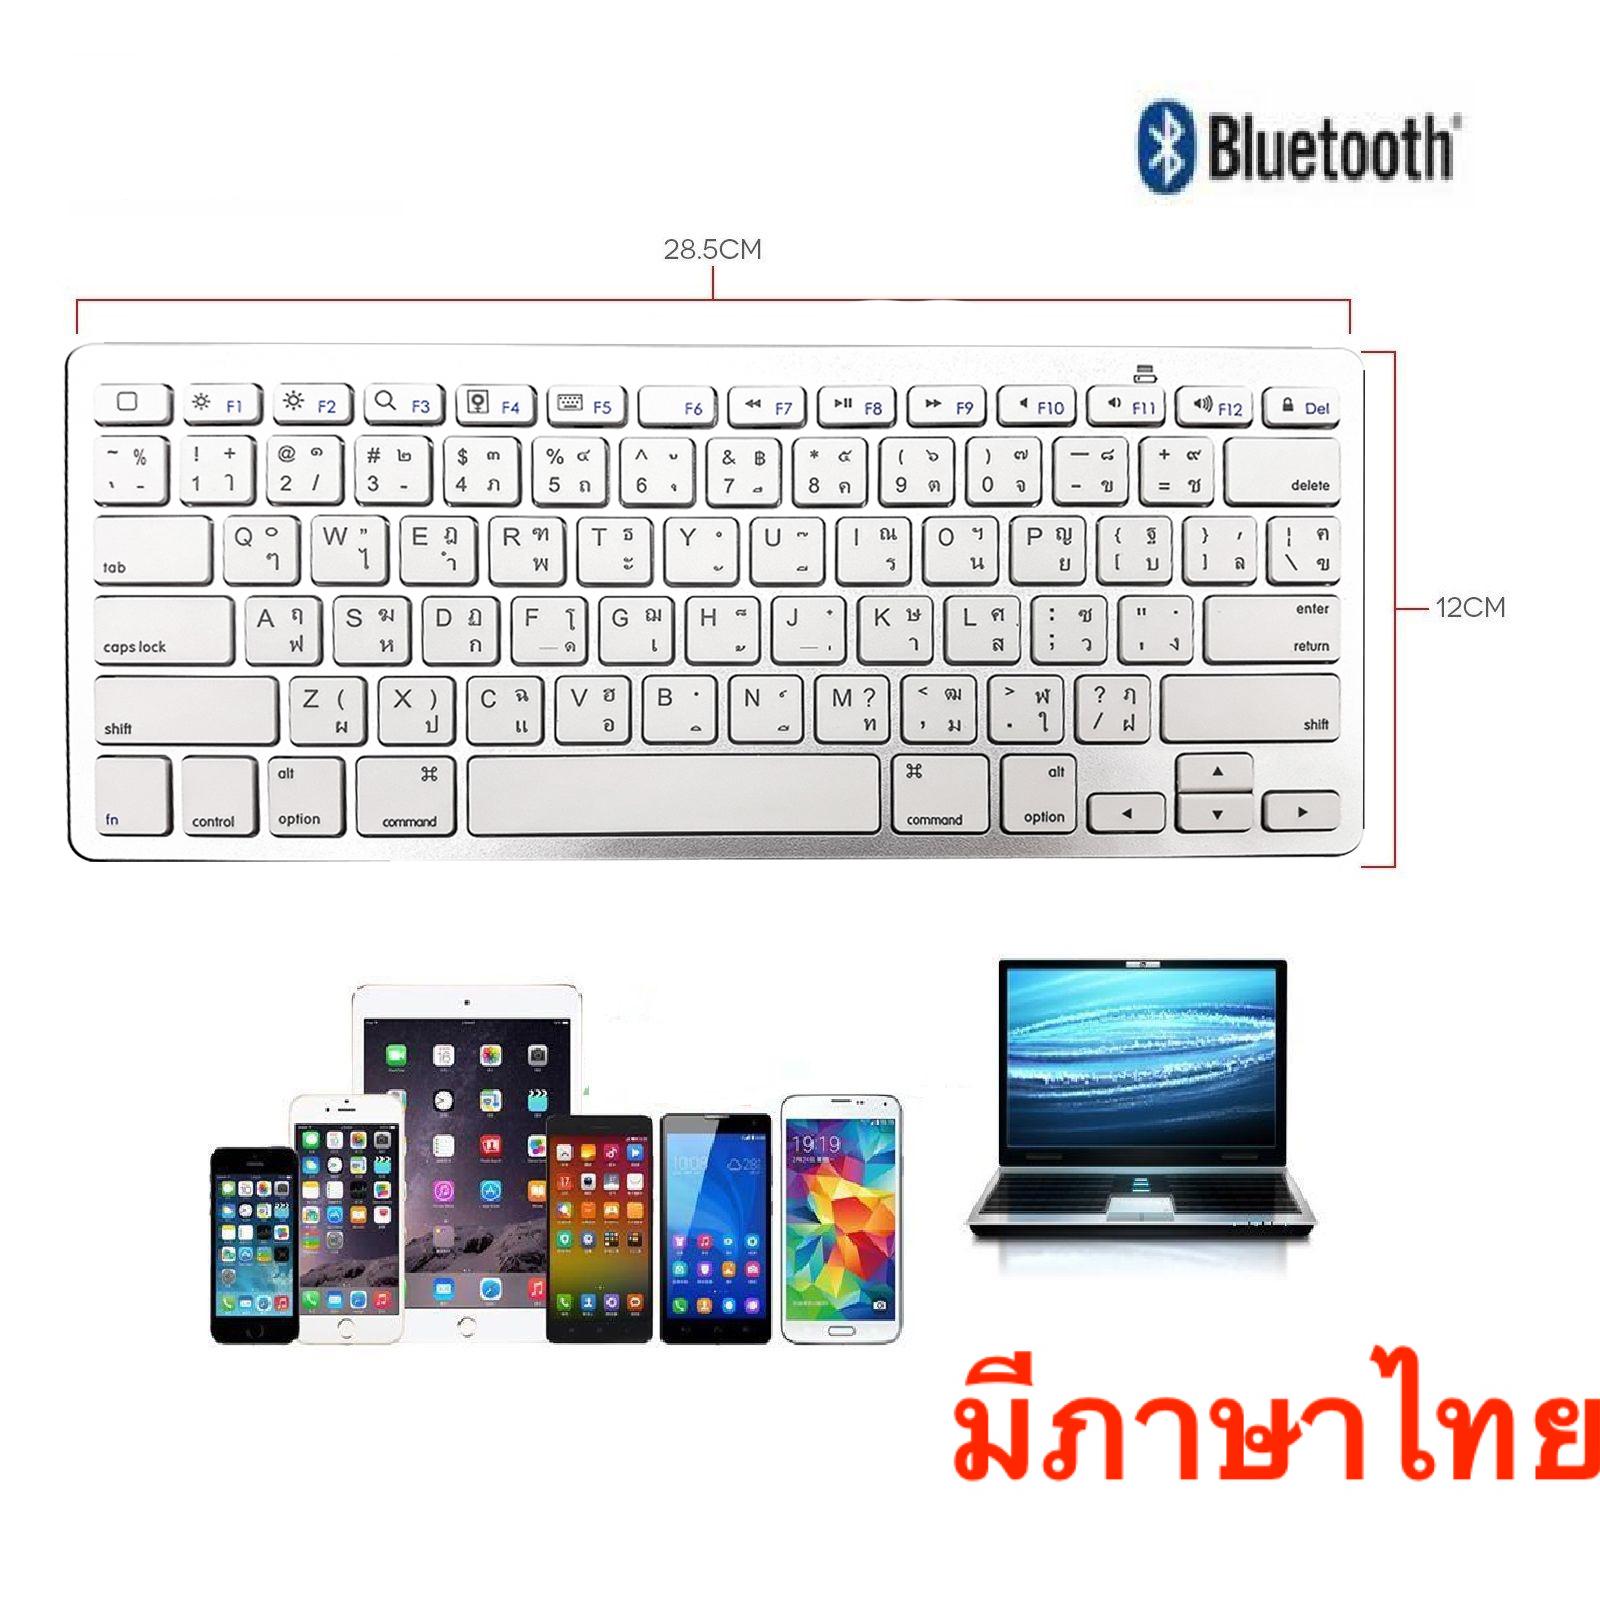 [Bluetooth Office Keyboard] คีย์บอร์ดไร้สายบลูทูธ KEYBOARD Wireless 3.0 Bluetooth Fast Connection EN/TH English and Thai Layout BK-3001 iOS Android PC Mobile Phone Tablet Smart TV